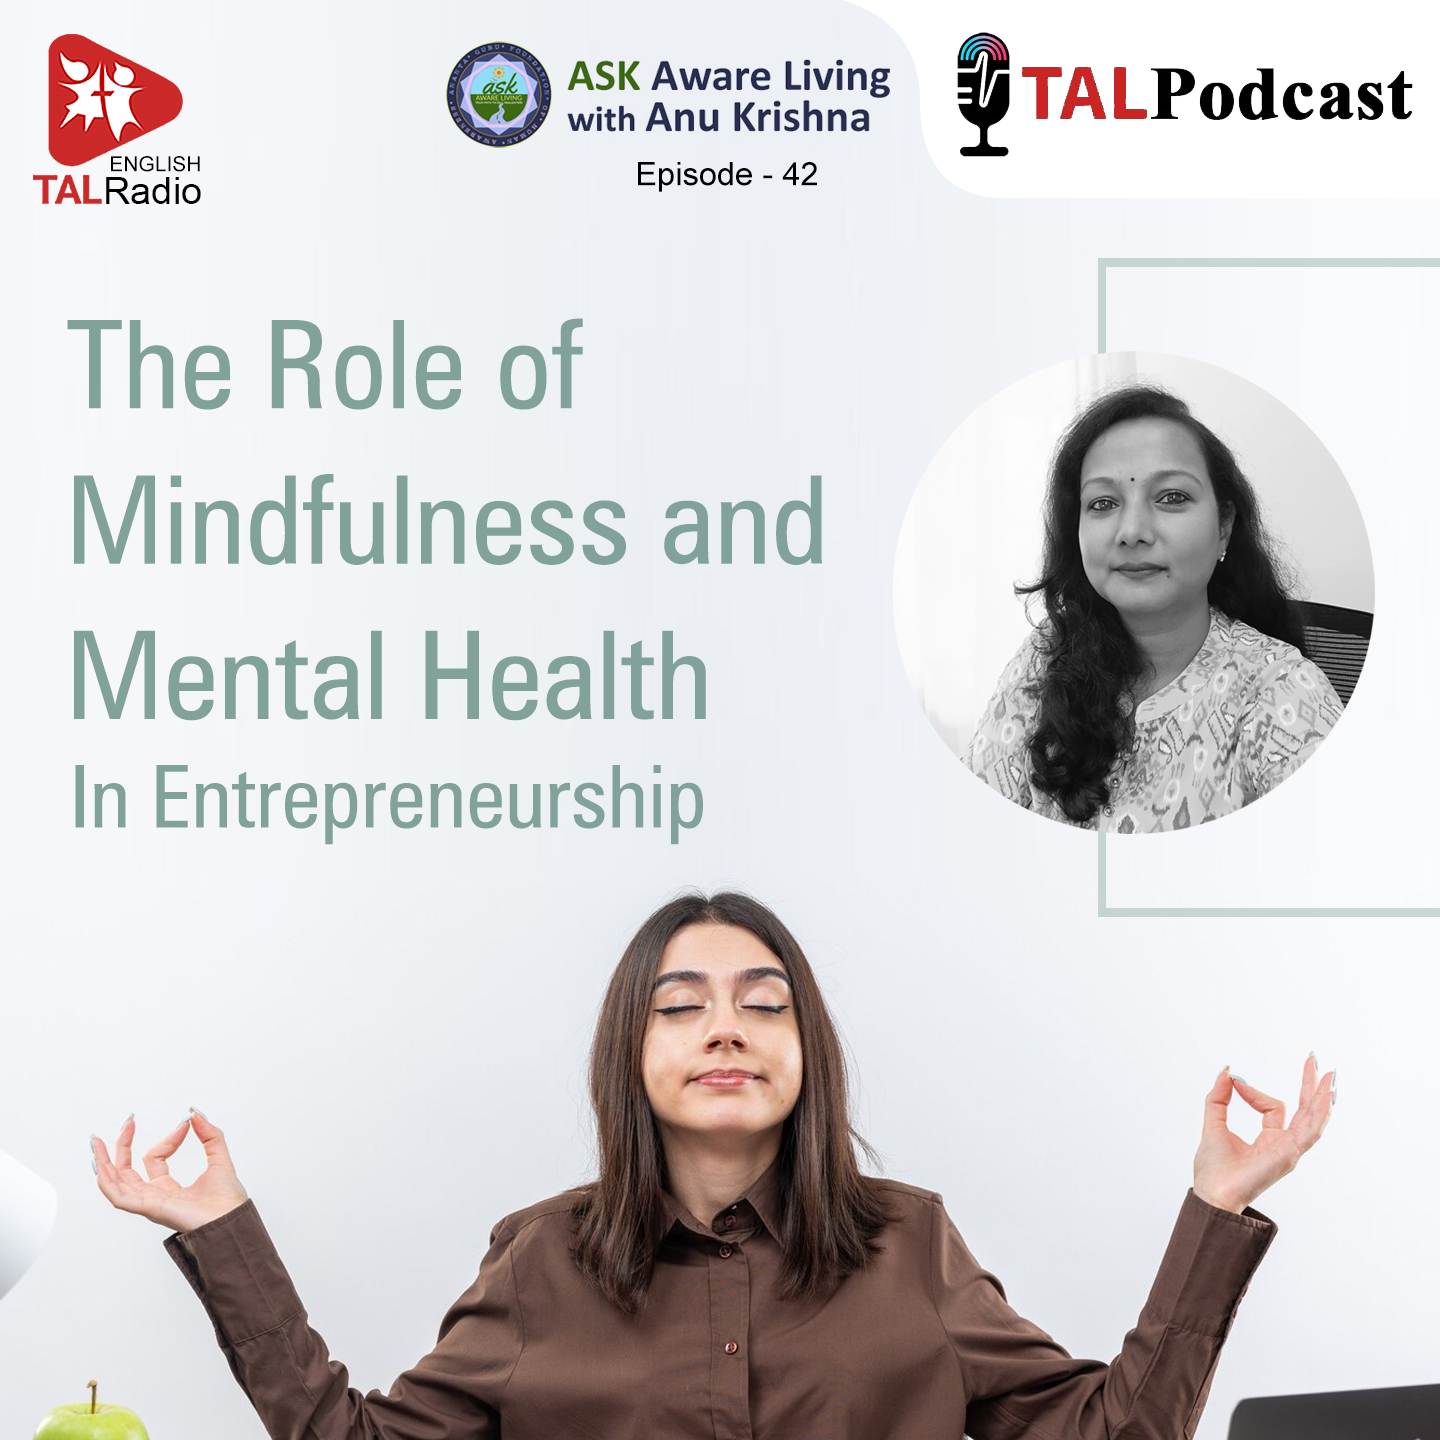 The role of mindfulness and mental health in entrepreneurship | Ask Aware Living - 42